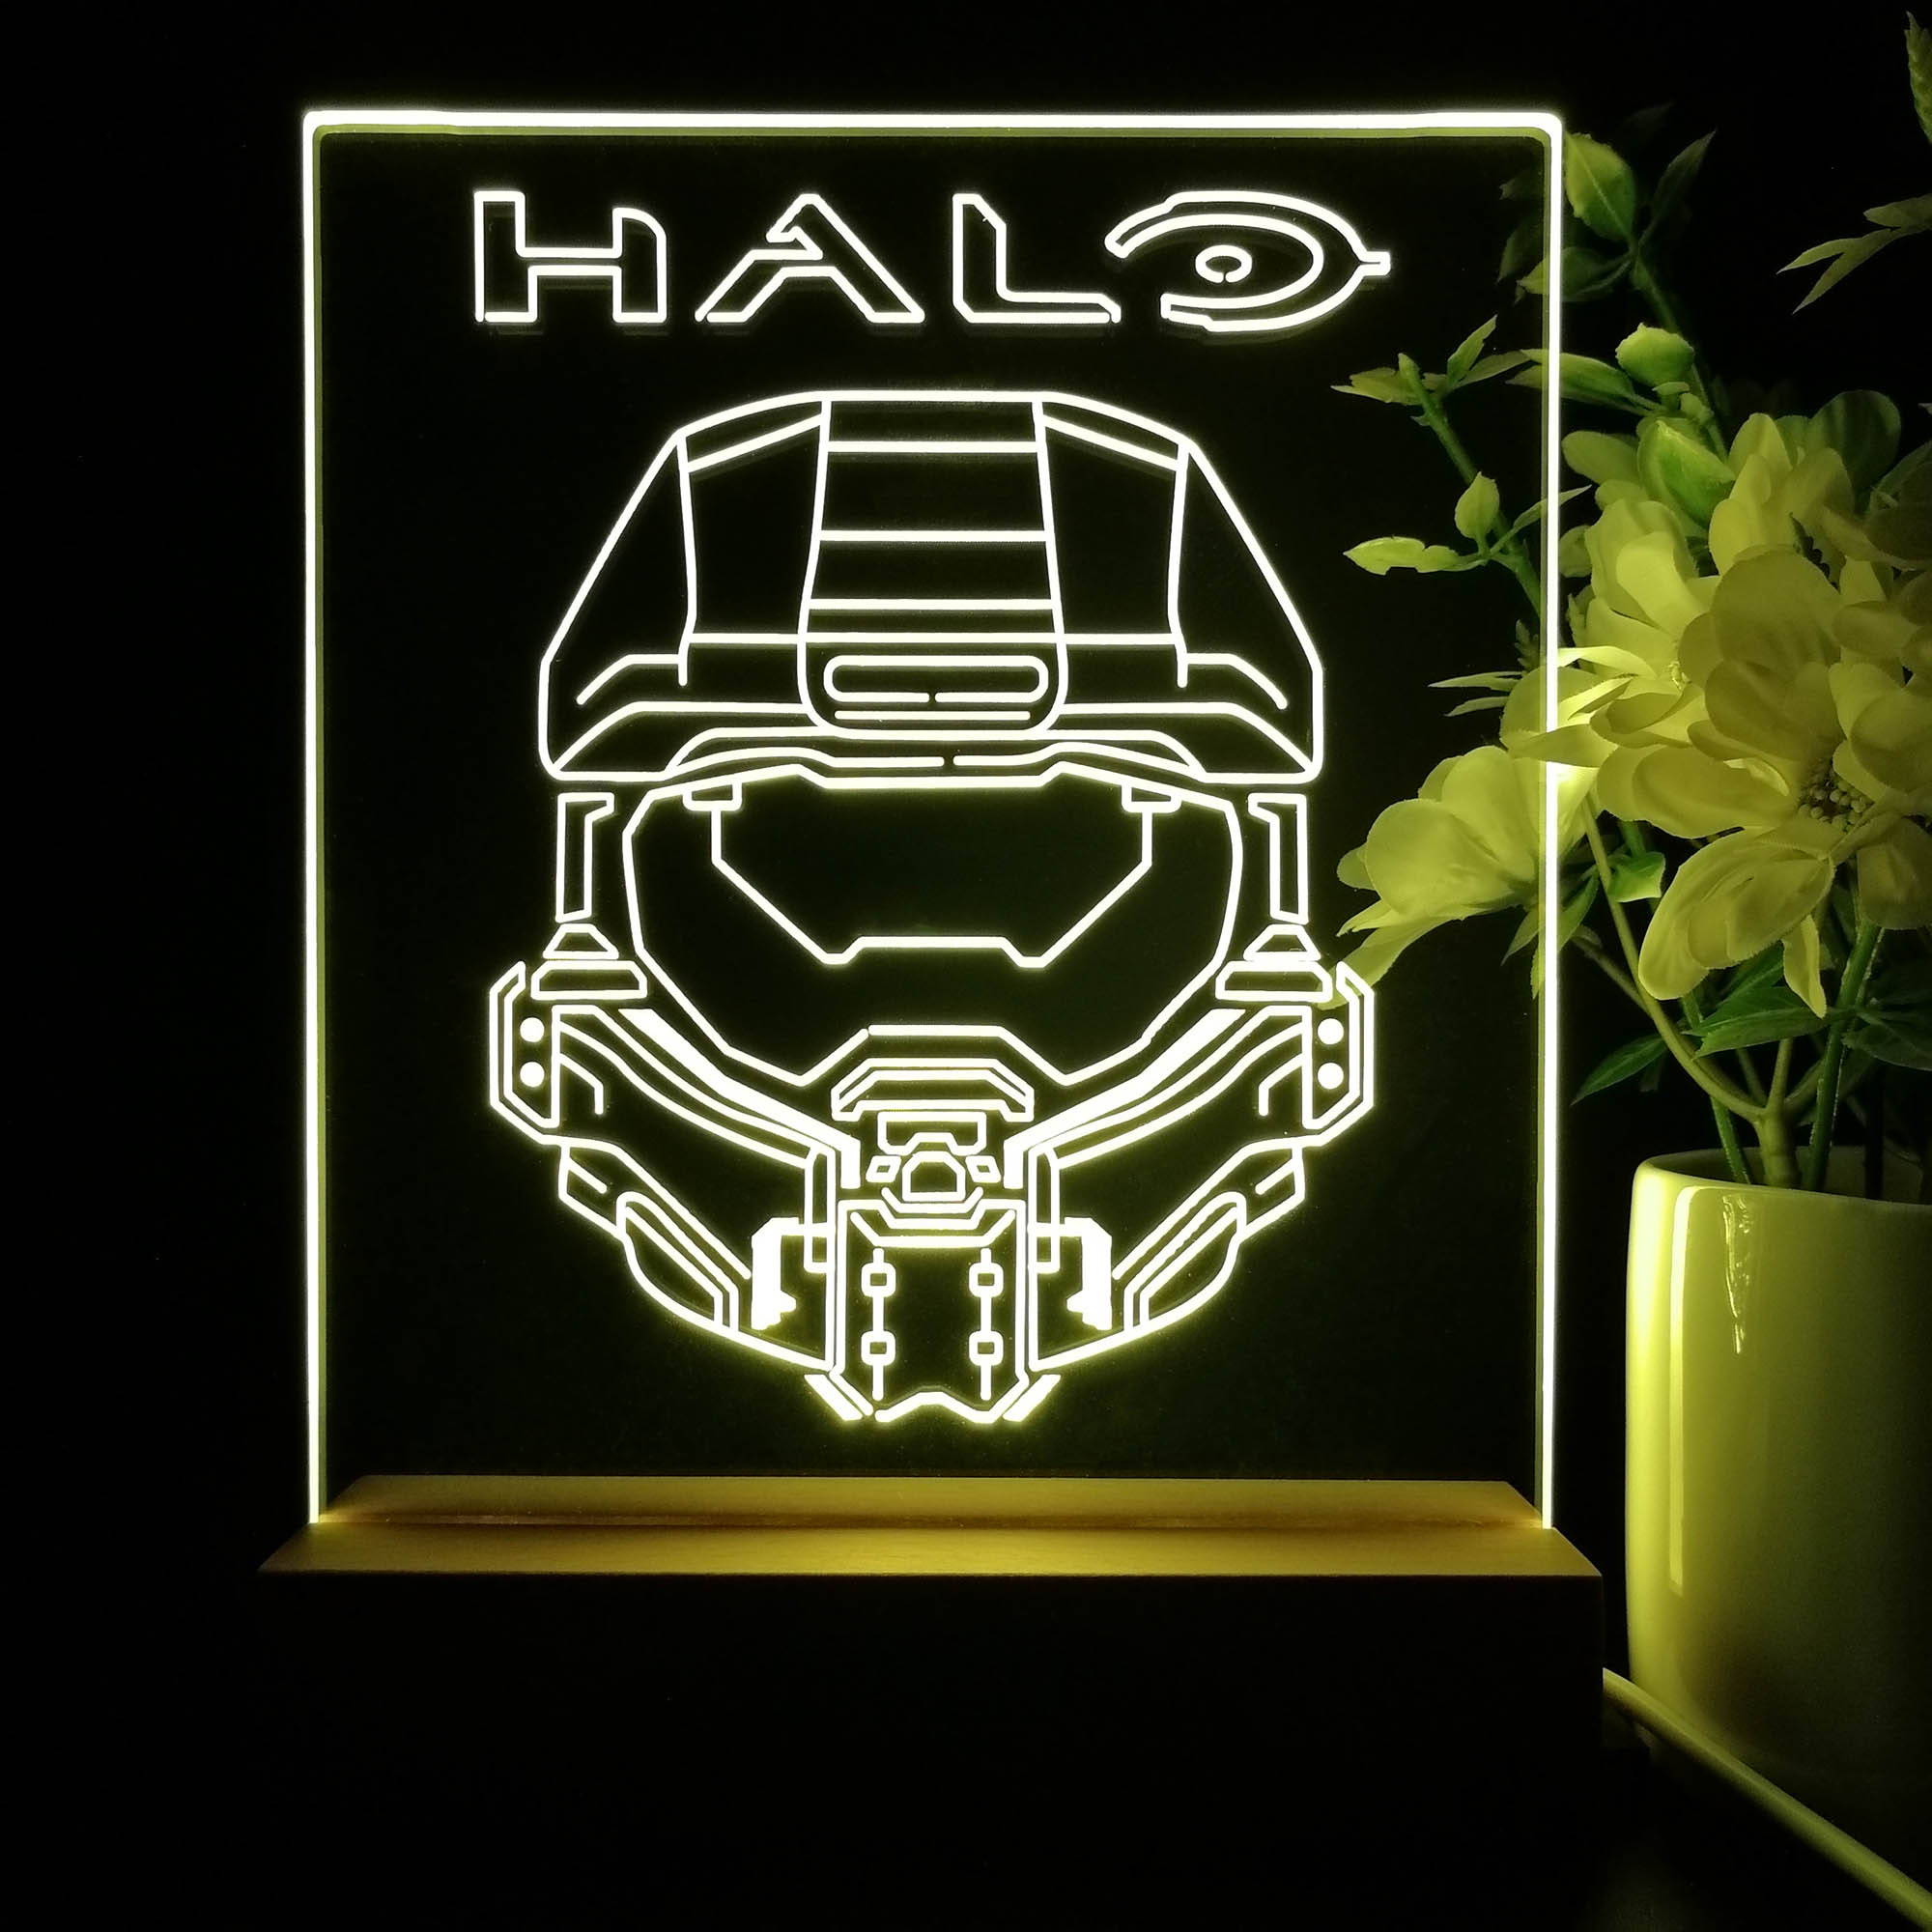 Halo Master Chief Game Room LED Sign Lamp Display